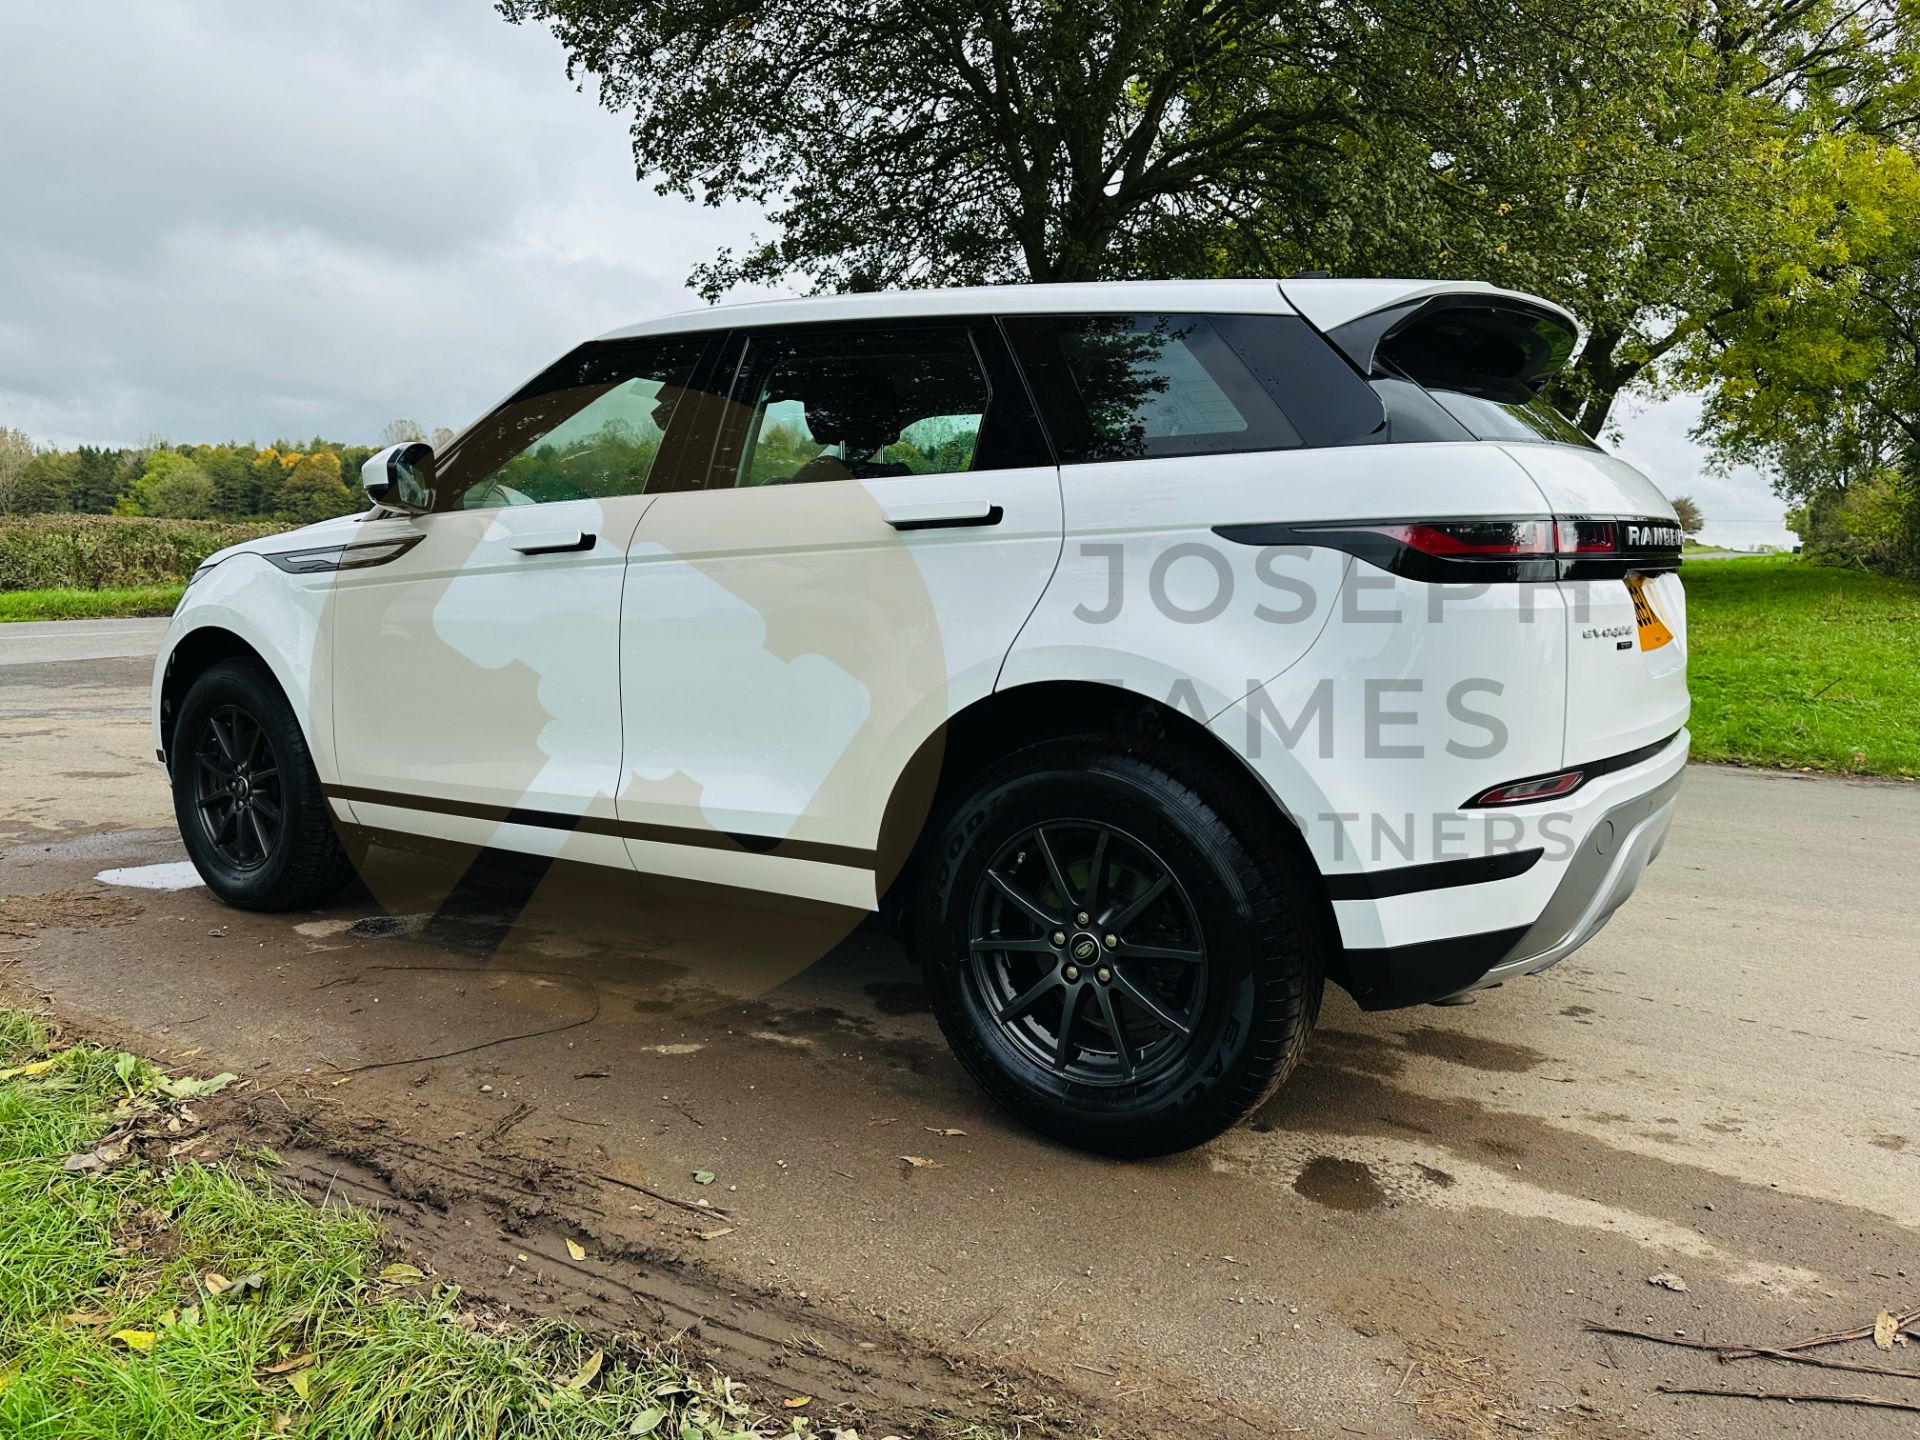 (ON SALE) LAND ROVER RANGE ROVER EVOQUE 2.0d AUTO-START STOP (2020 MODEL) ONLY 33K MILES FROM NEW - Image 9 of 41